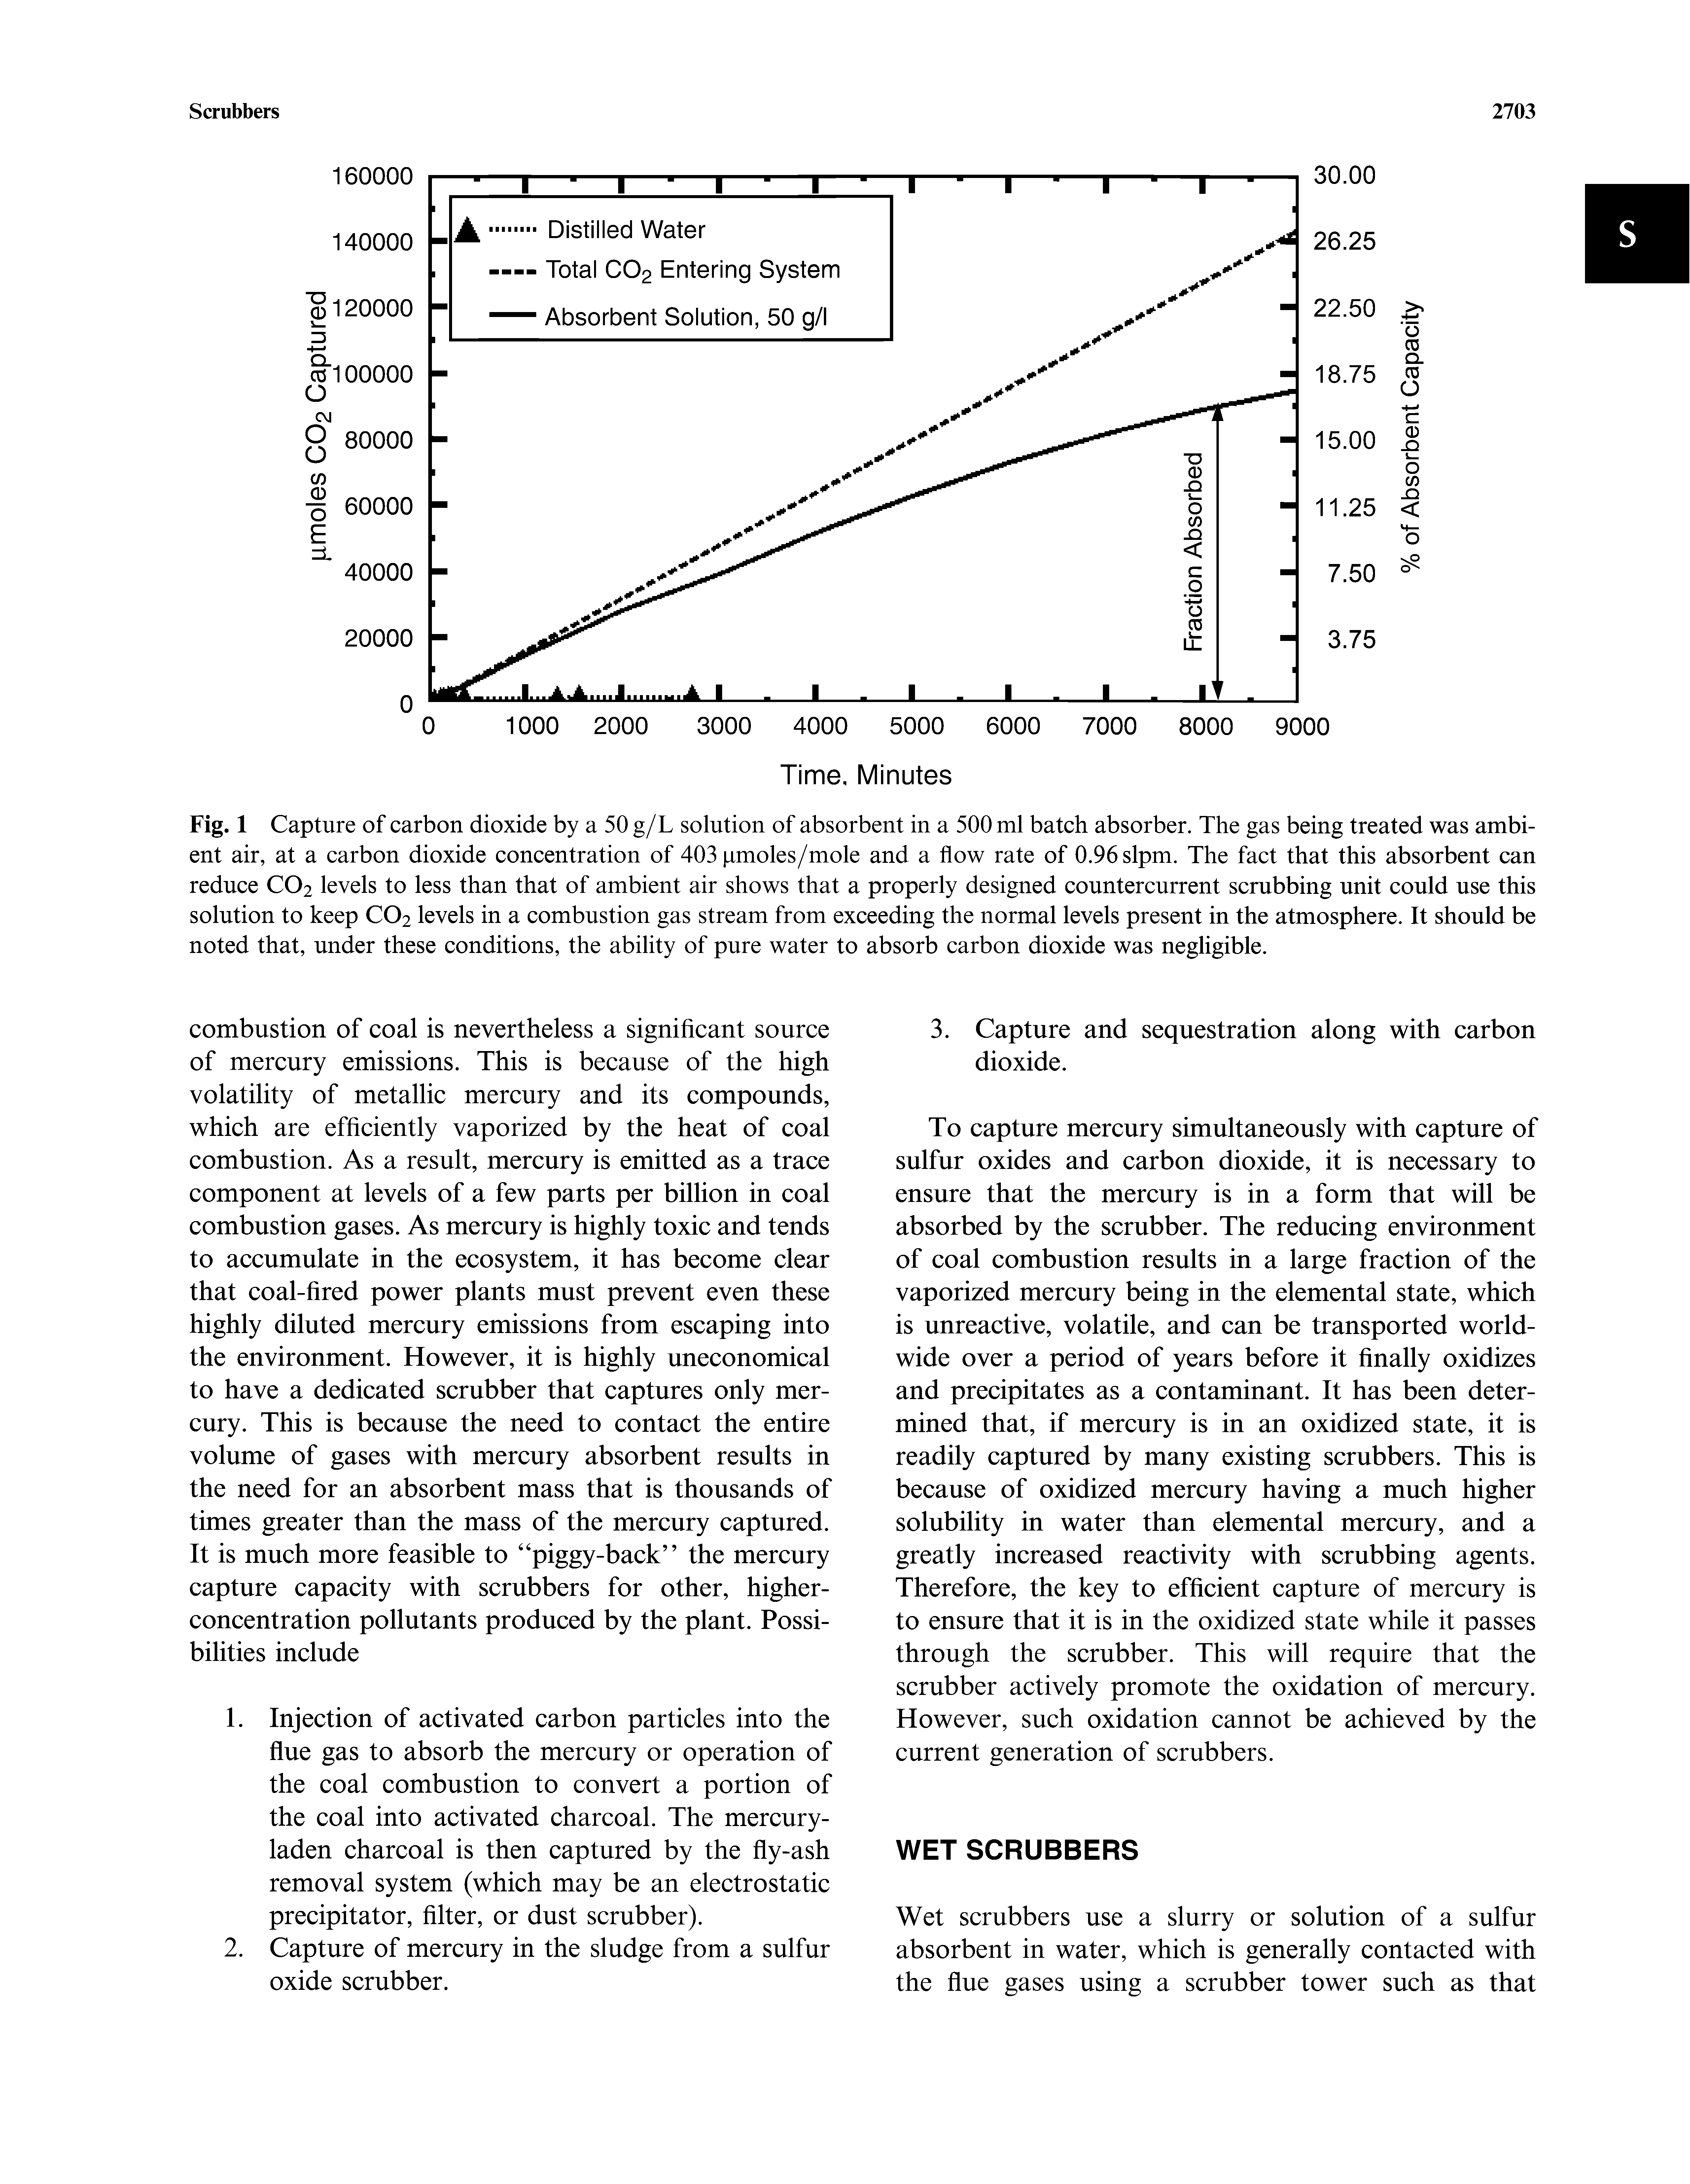 Fig. 1 Capture of carbon dioxide by a 50 g/L solution of absorbent in a 500 ml batch absorber. The gas being treated was ambient air, at a carbon dioxide concentration of 403 pmoles/mole and a flow rate of 0.96 slpm. The fact that this absorbent can reduce CO2 levels to less than that of ambient air shows that a properly designed countercurrent scrubbing unit could use this solution to keep CO2 levels in a combustion gas stream from exceeding the normal levels present in the atmosphere. It should be noted that, under these conditions, the ability of pure water to absorb carbon dioxide was negligible.